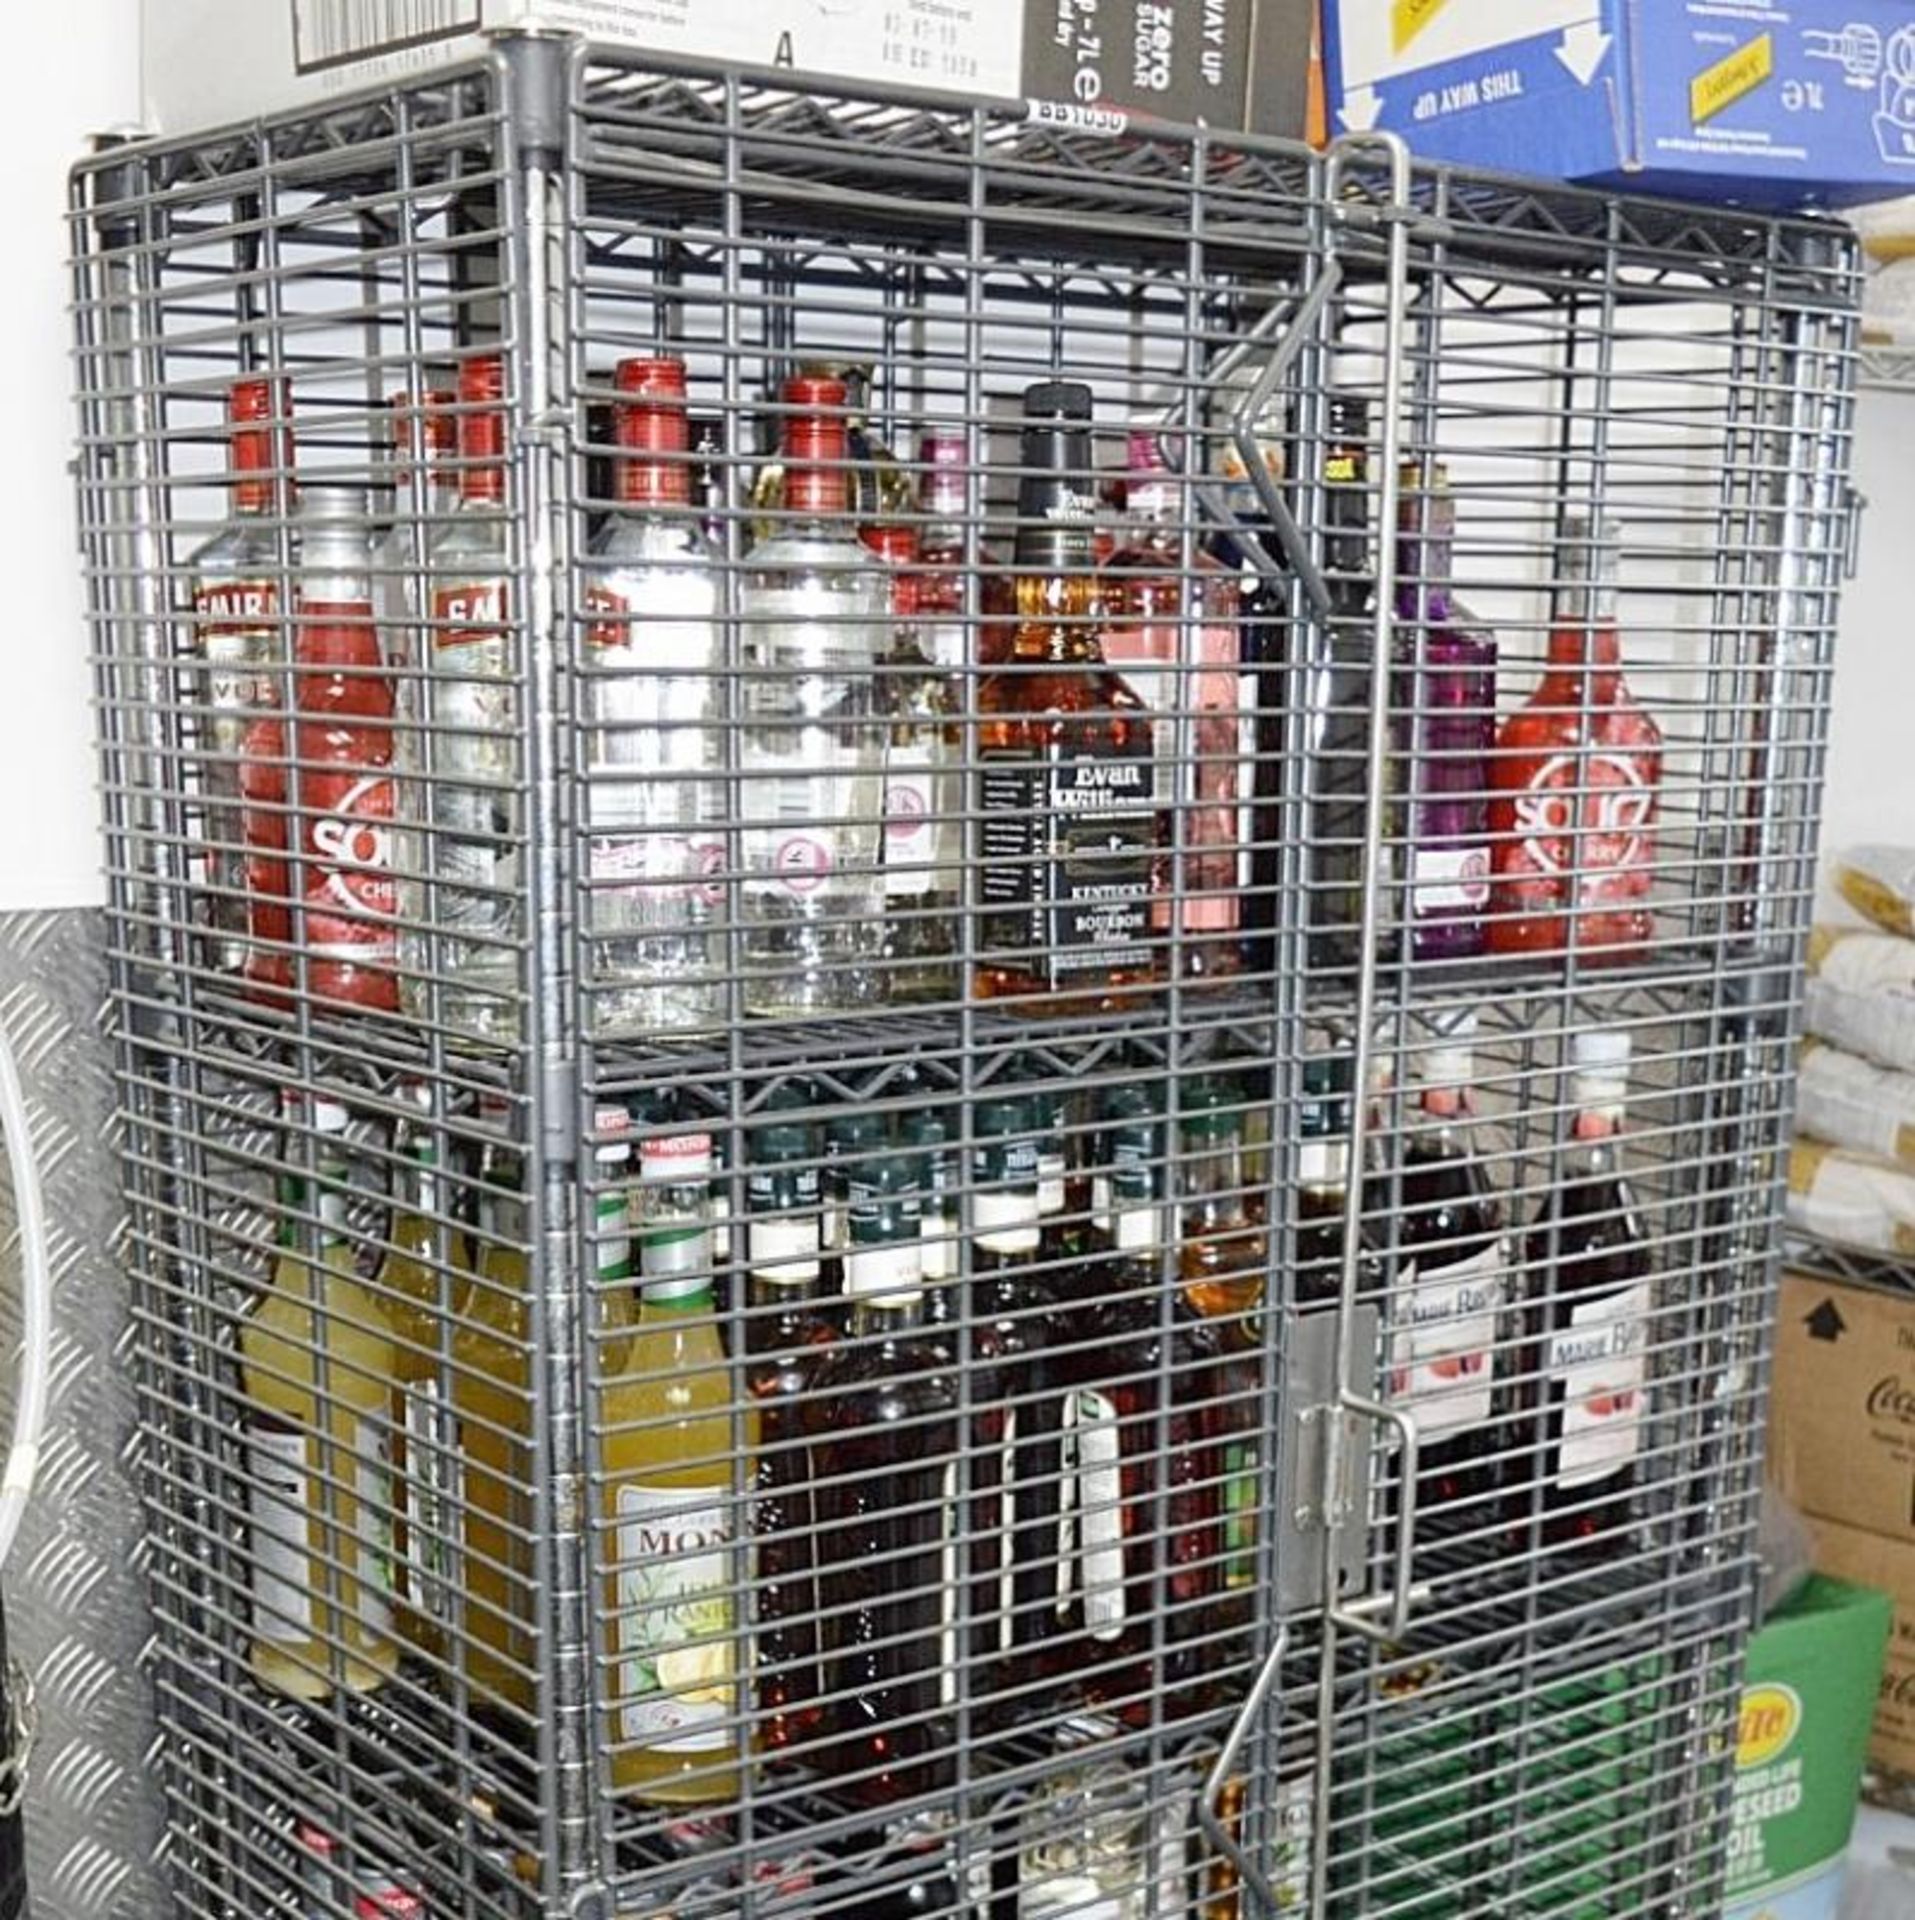 1 x Wines / Spirits Lockable Security Cage - H160 x W80 x D40 cms - CL357 - Location: Bolton BL1 - Image 2 of 3